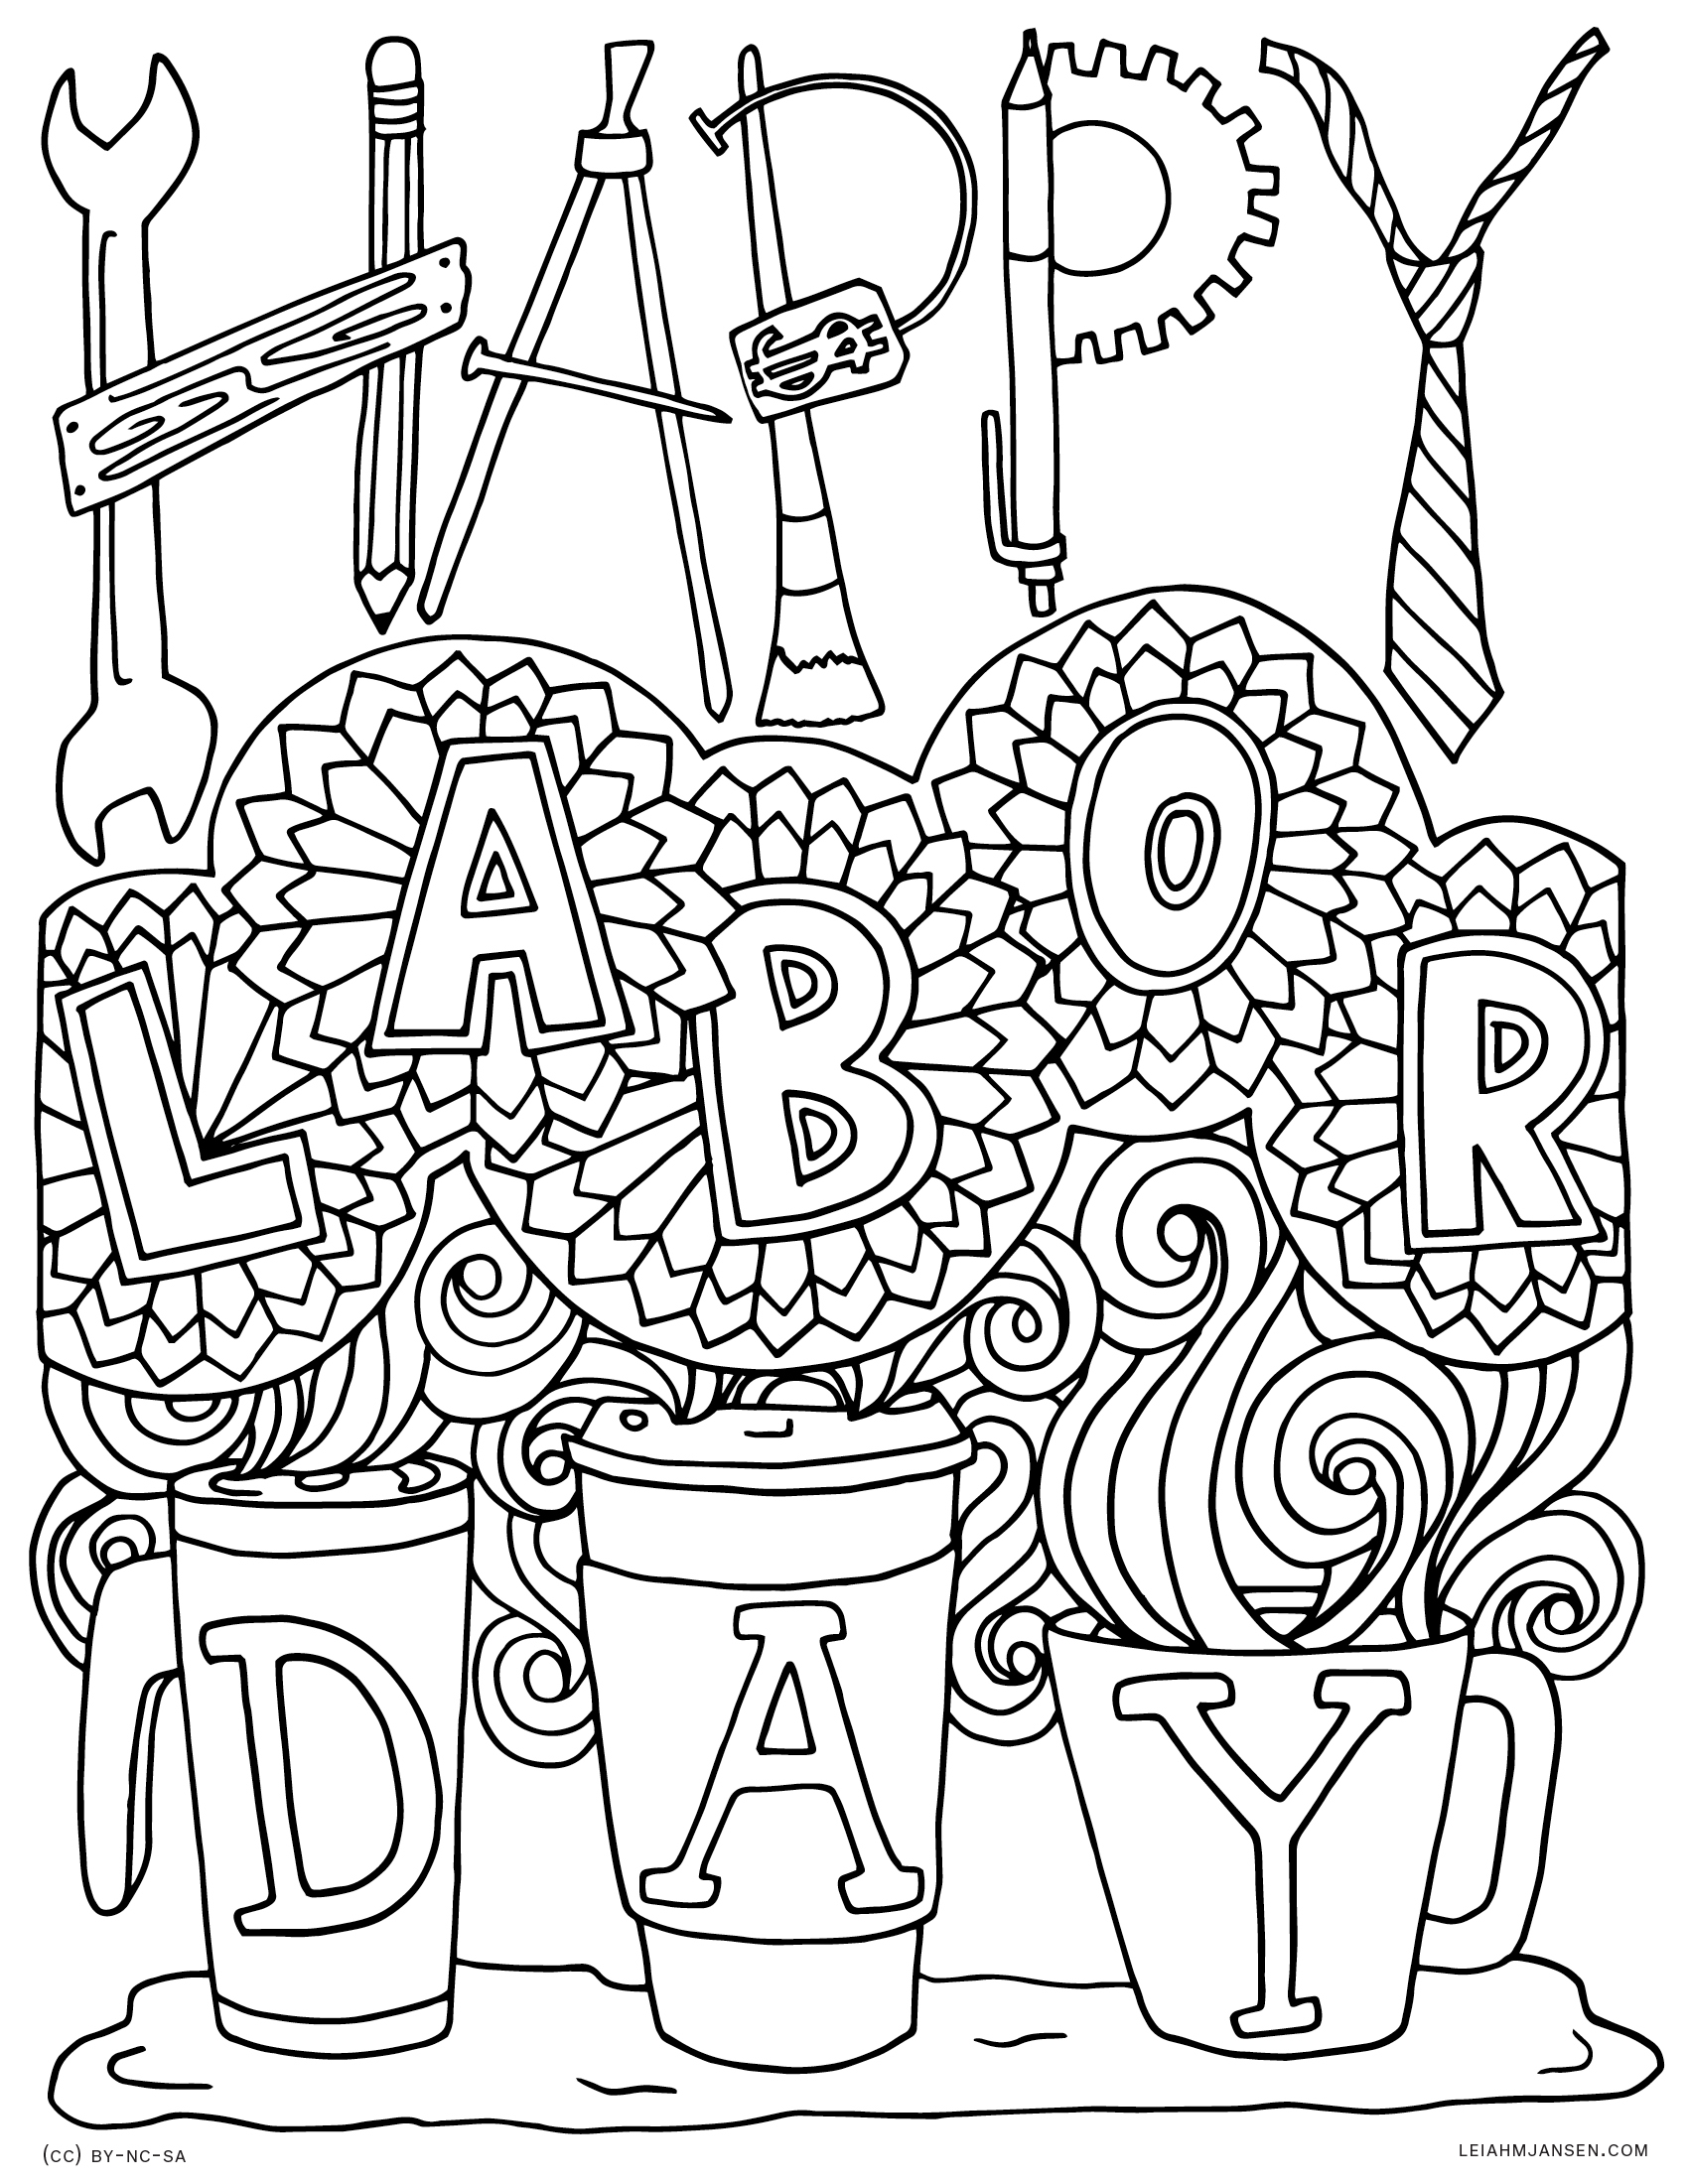 labor-day-book-coloring-pages